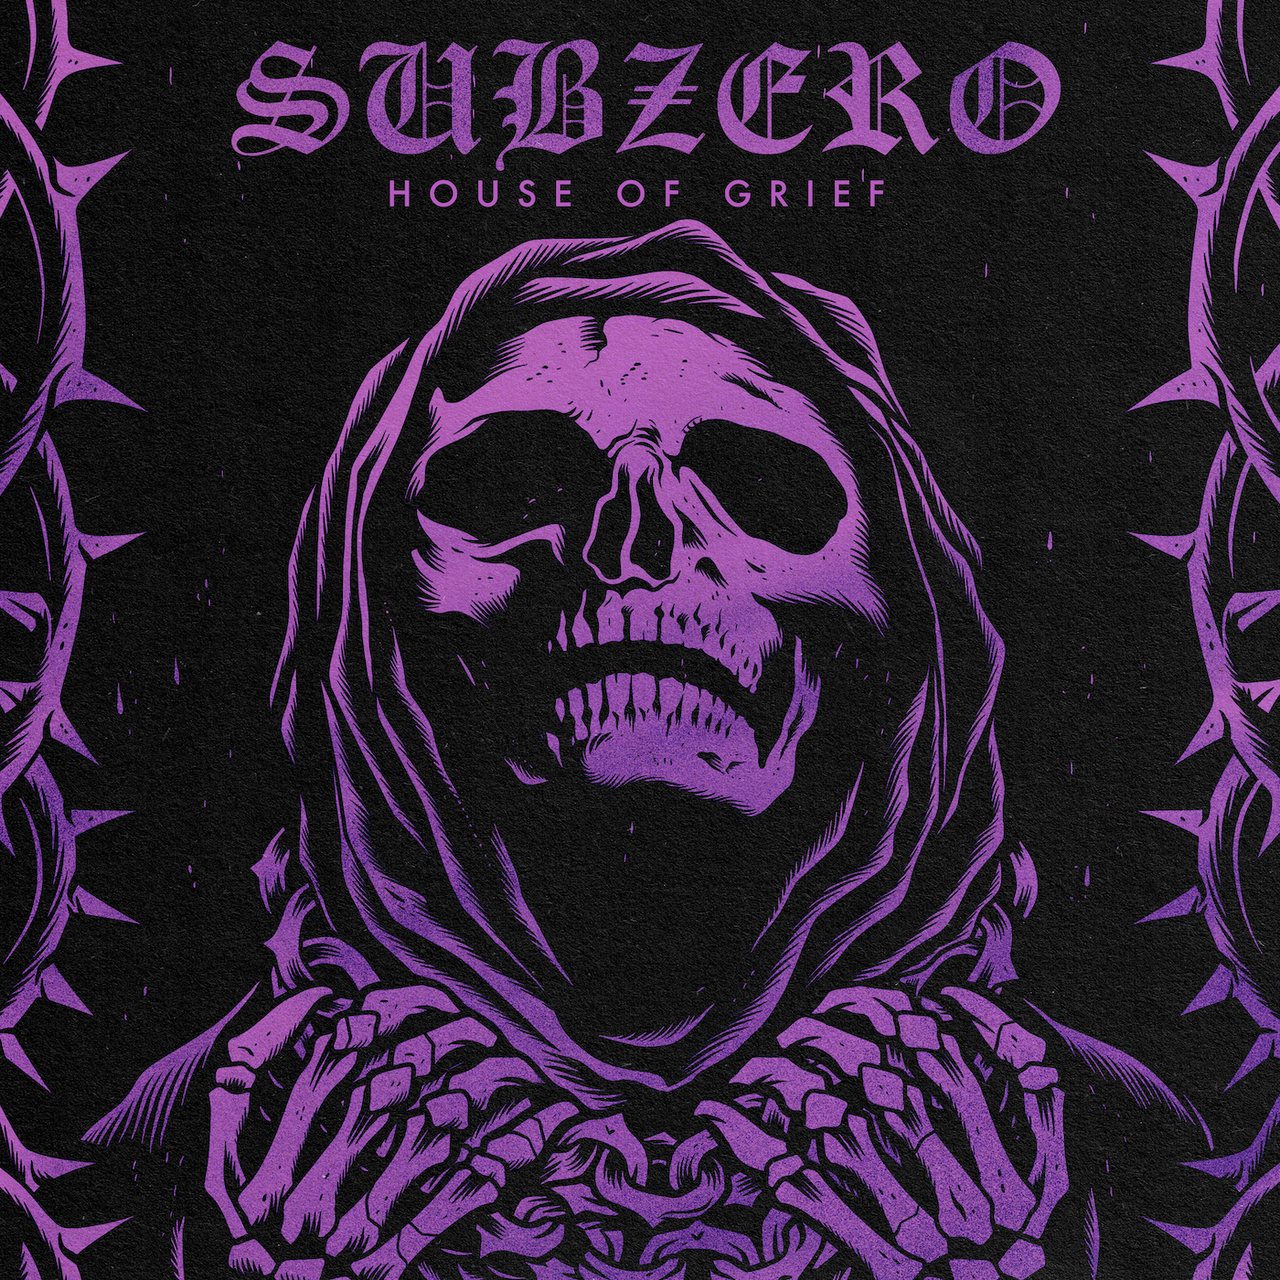 Buy – Subzero "House of Grief" 7" – Band & Music Merch – Cold Cuts Merch